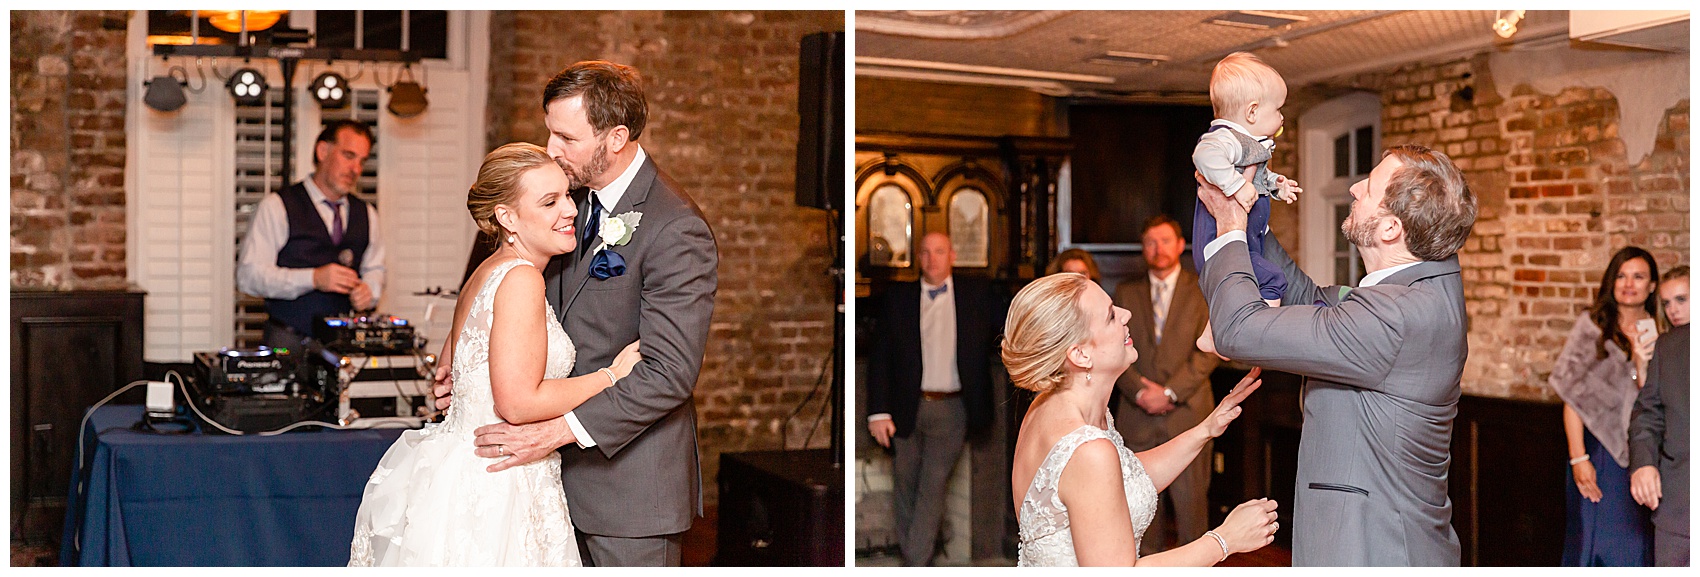 wedding reception at the Historic Rice Mill in downtown Charleston